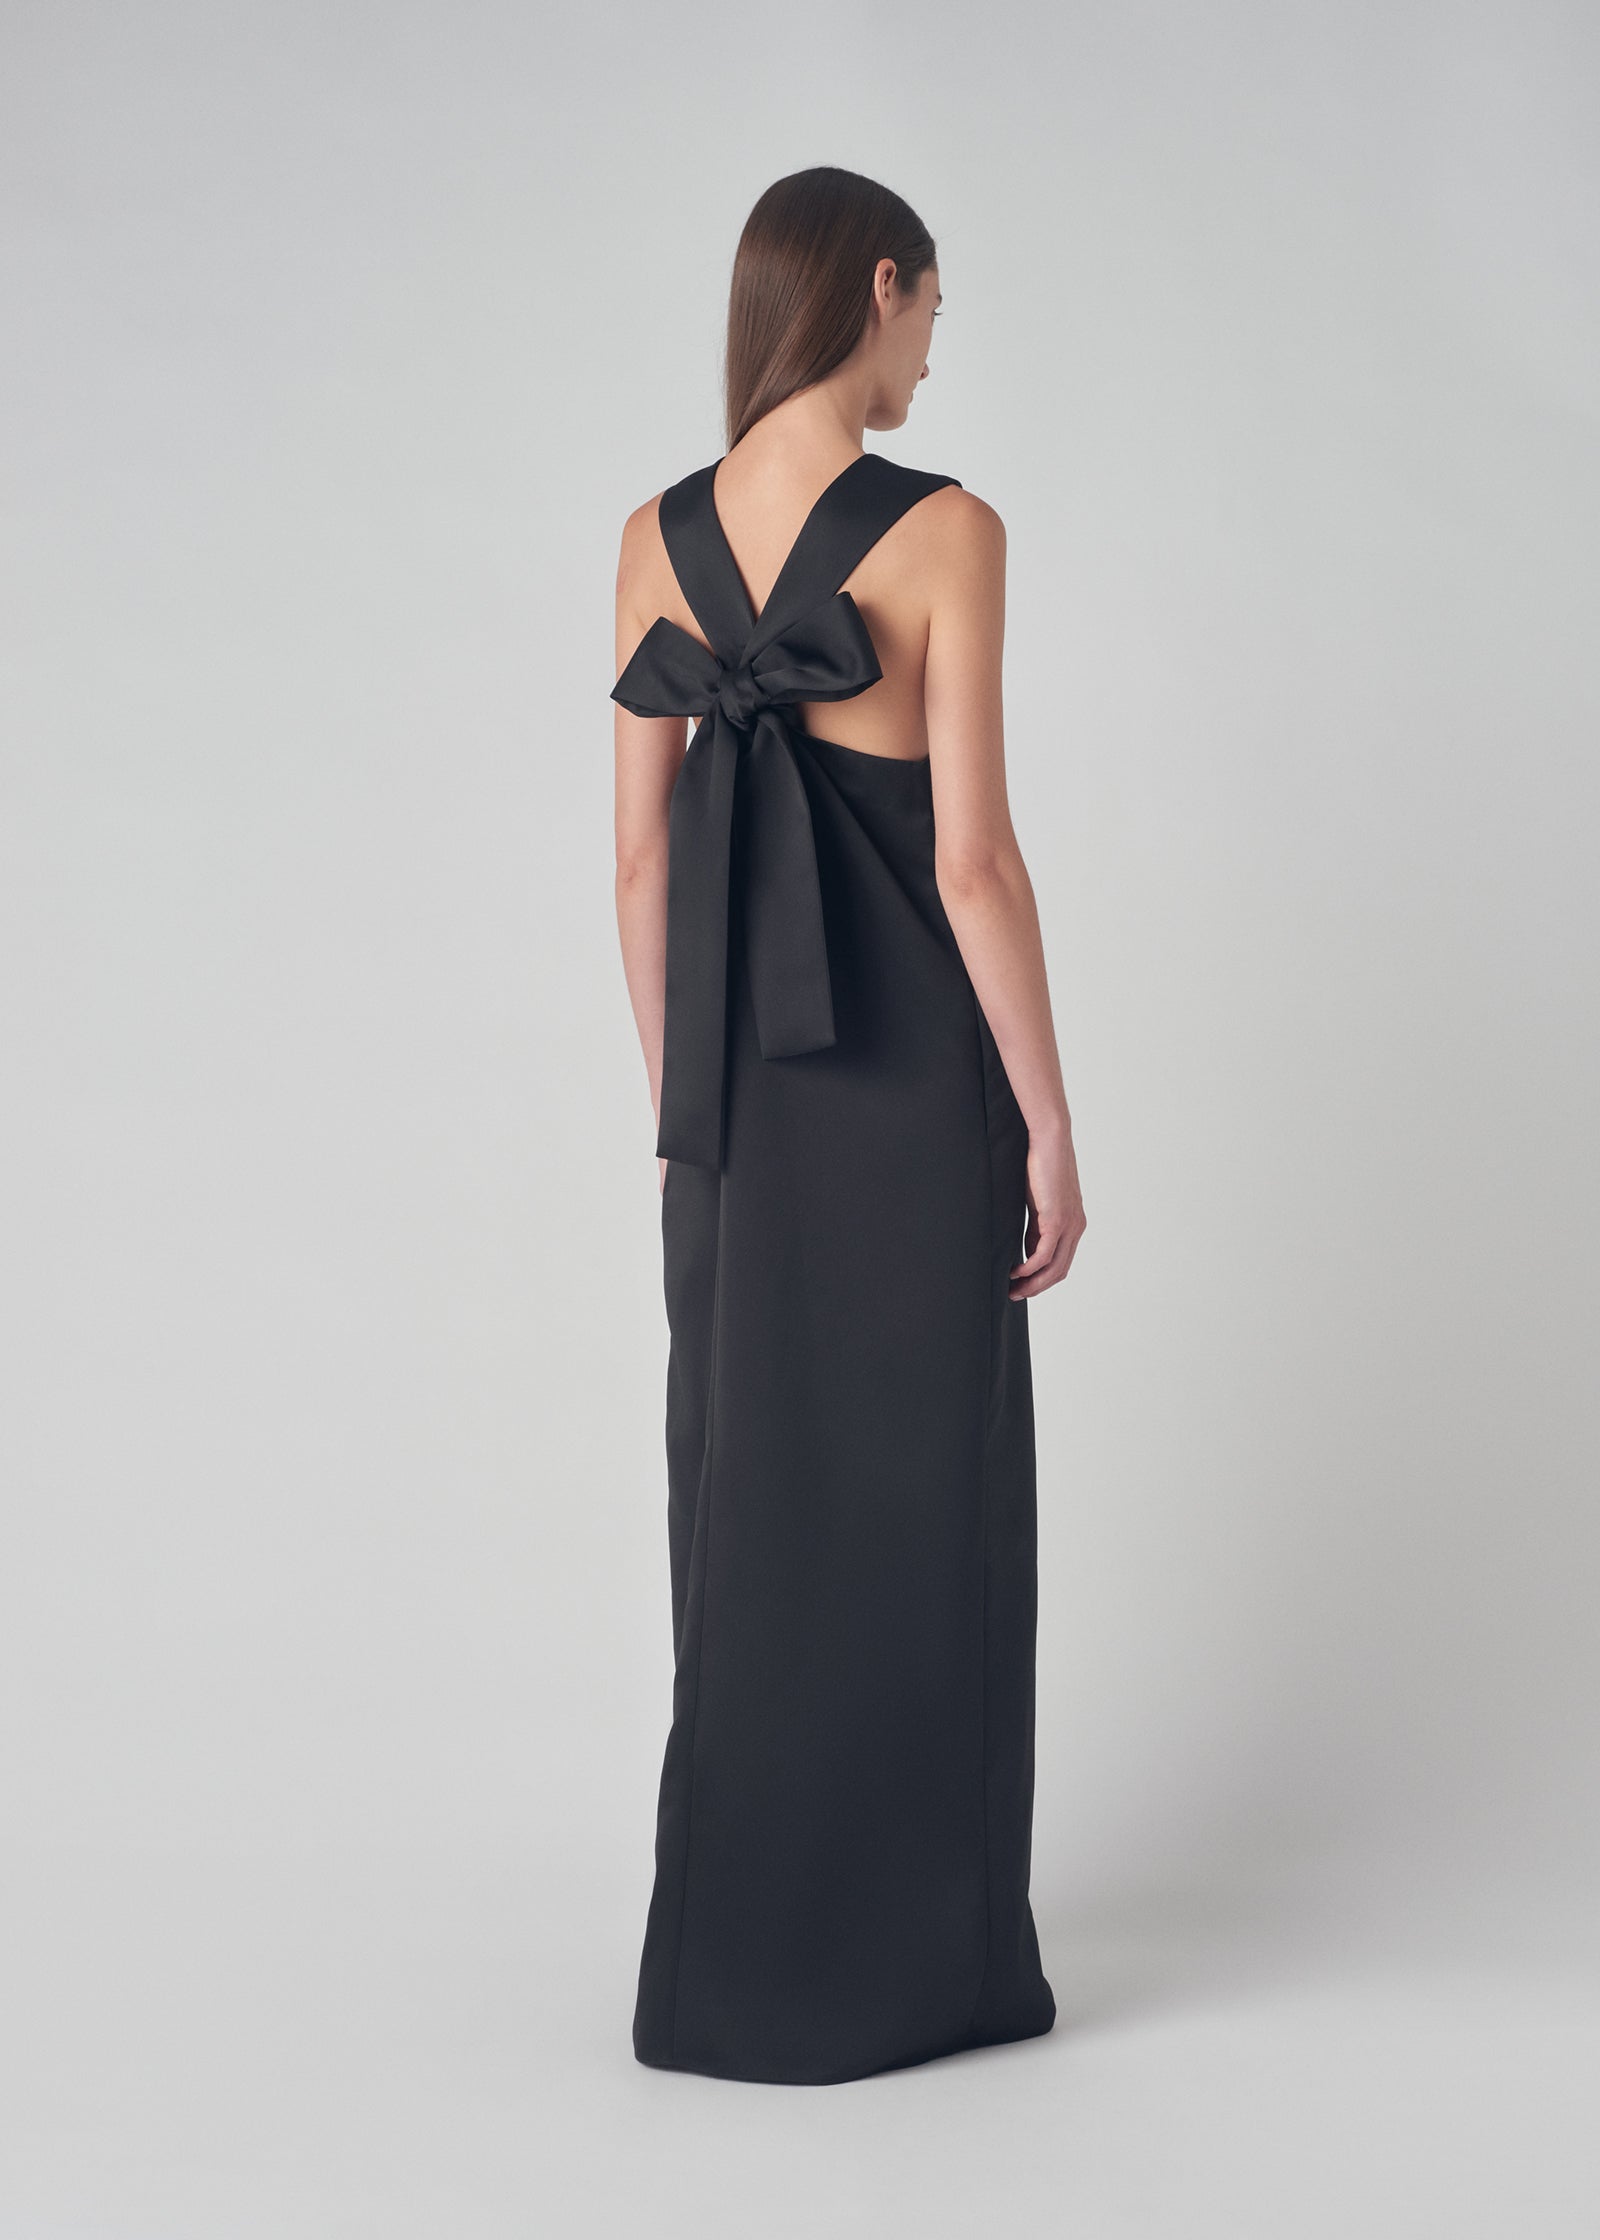 Sleeveless Bow Back Dress in Duchess Satin - Black - CO Collections